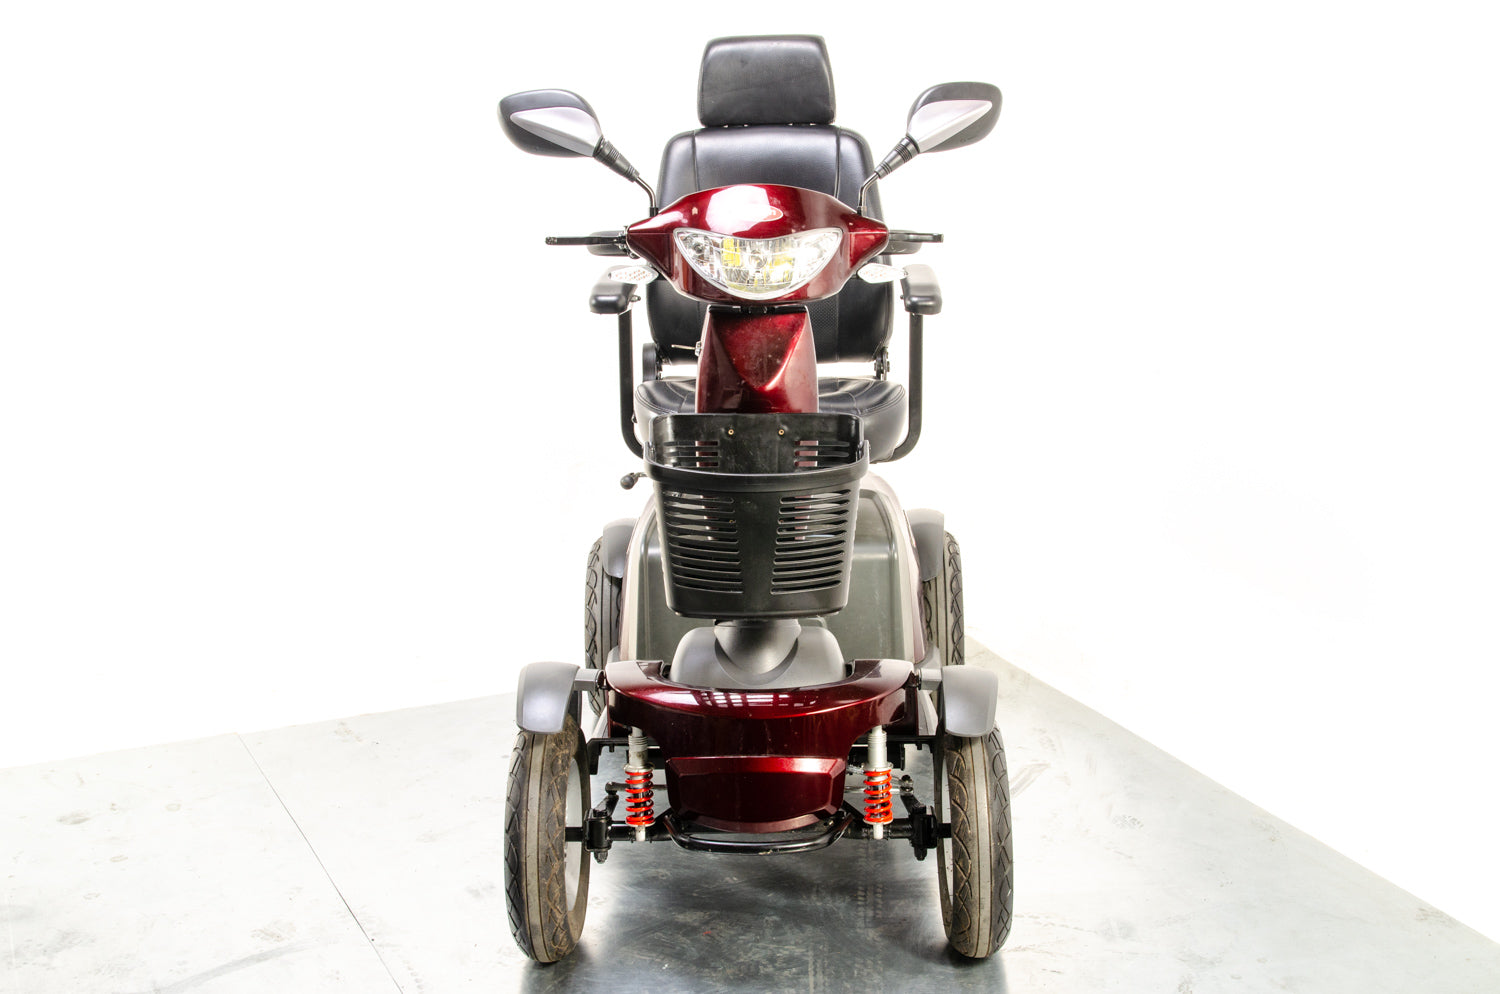 Eden Roadmaster Plus All-Terrain Off-Road Used Mobility Scooter 8mph ATV Luxury Electric Large 14000